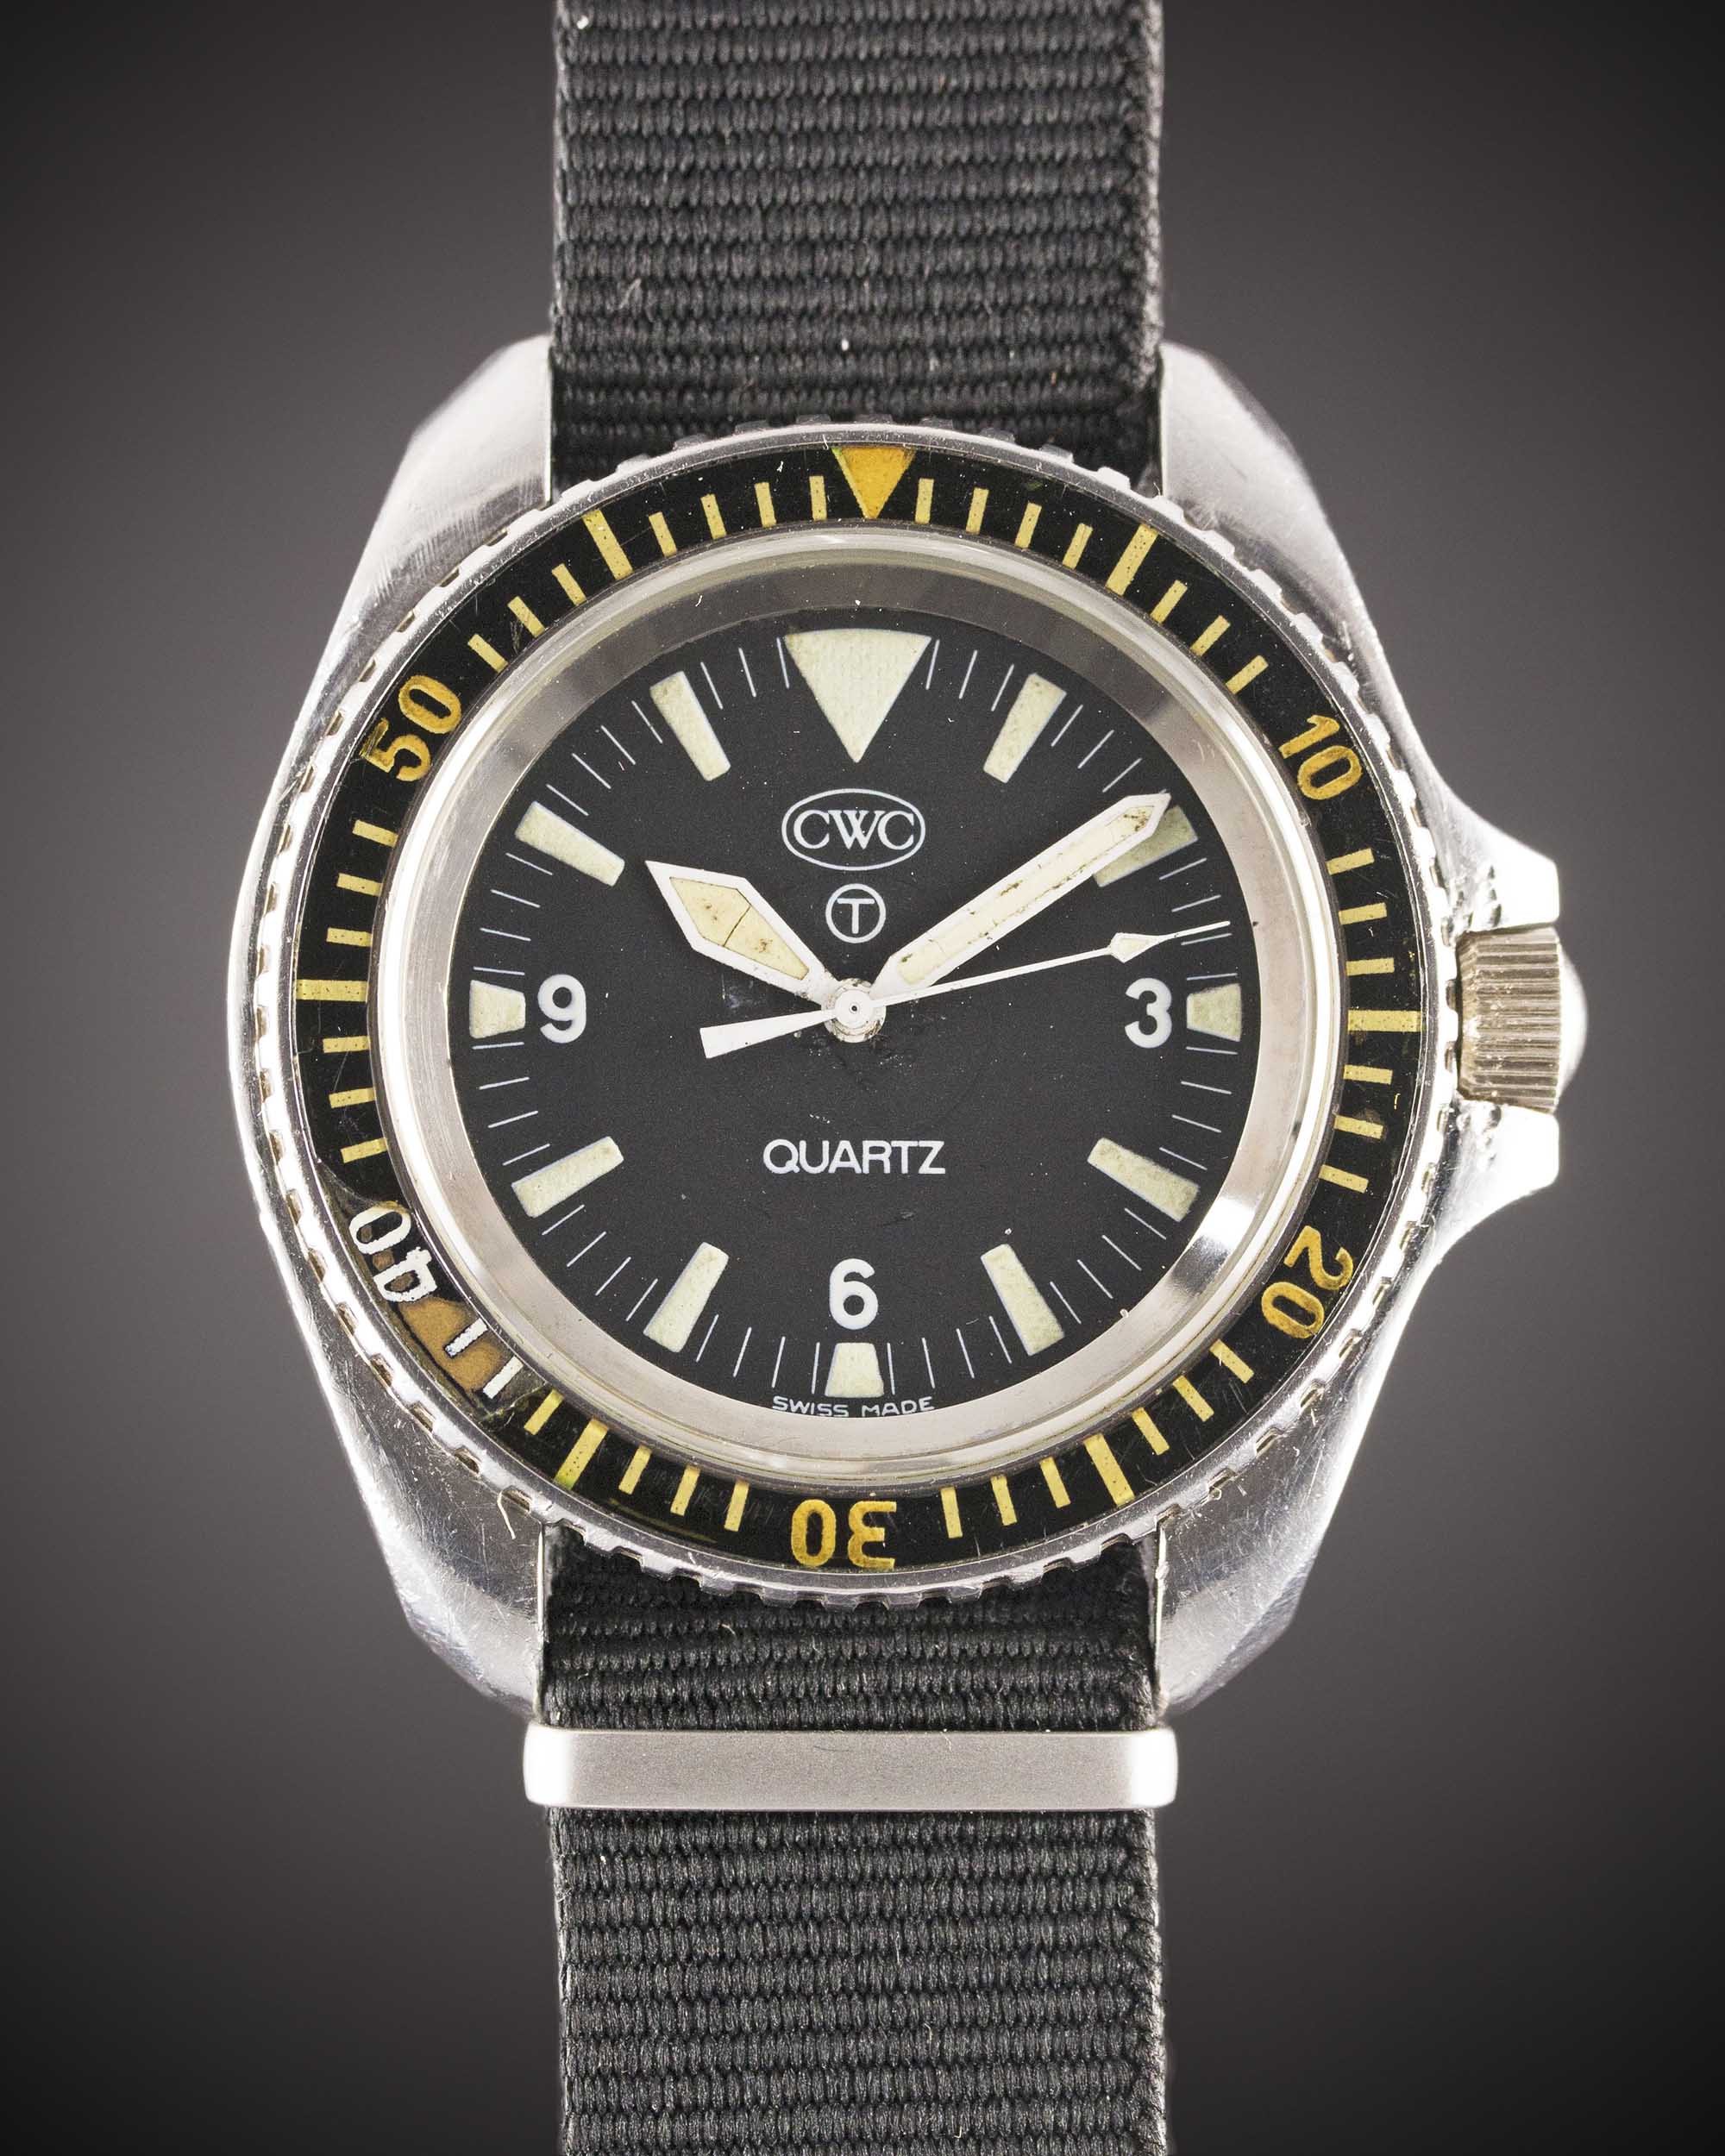 A RARE GENTLEMAN'S STAINLESS STEEL BRITISH MILITARY ROYAL NAVY CWC QUARTZ DIVERS WRIST WATCH DATED